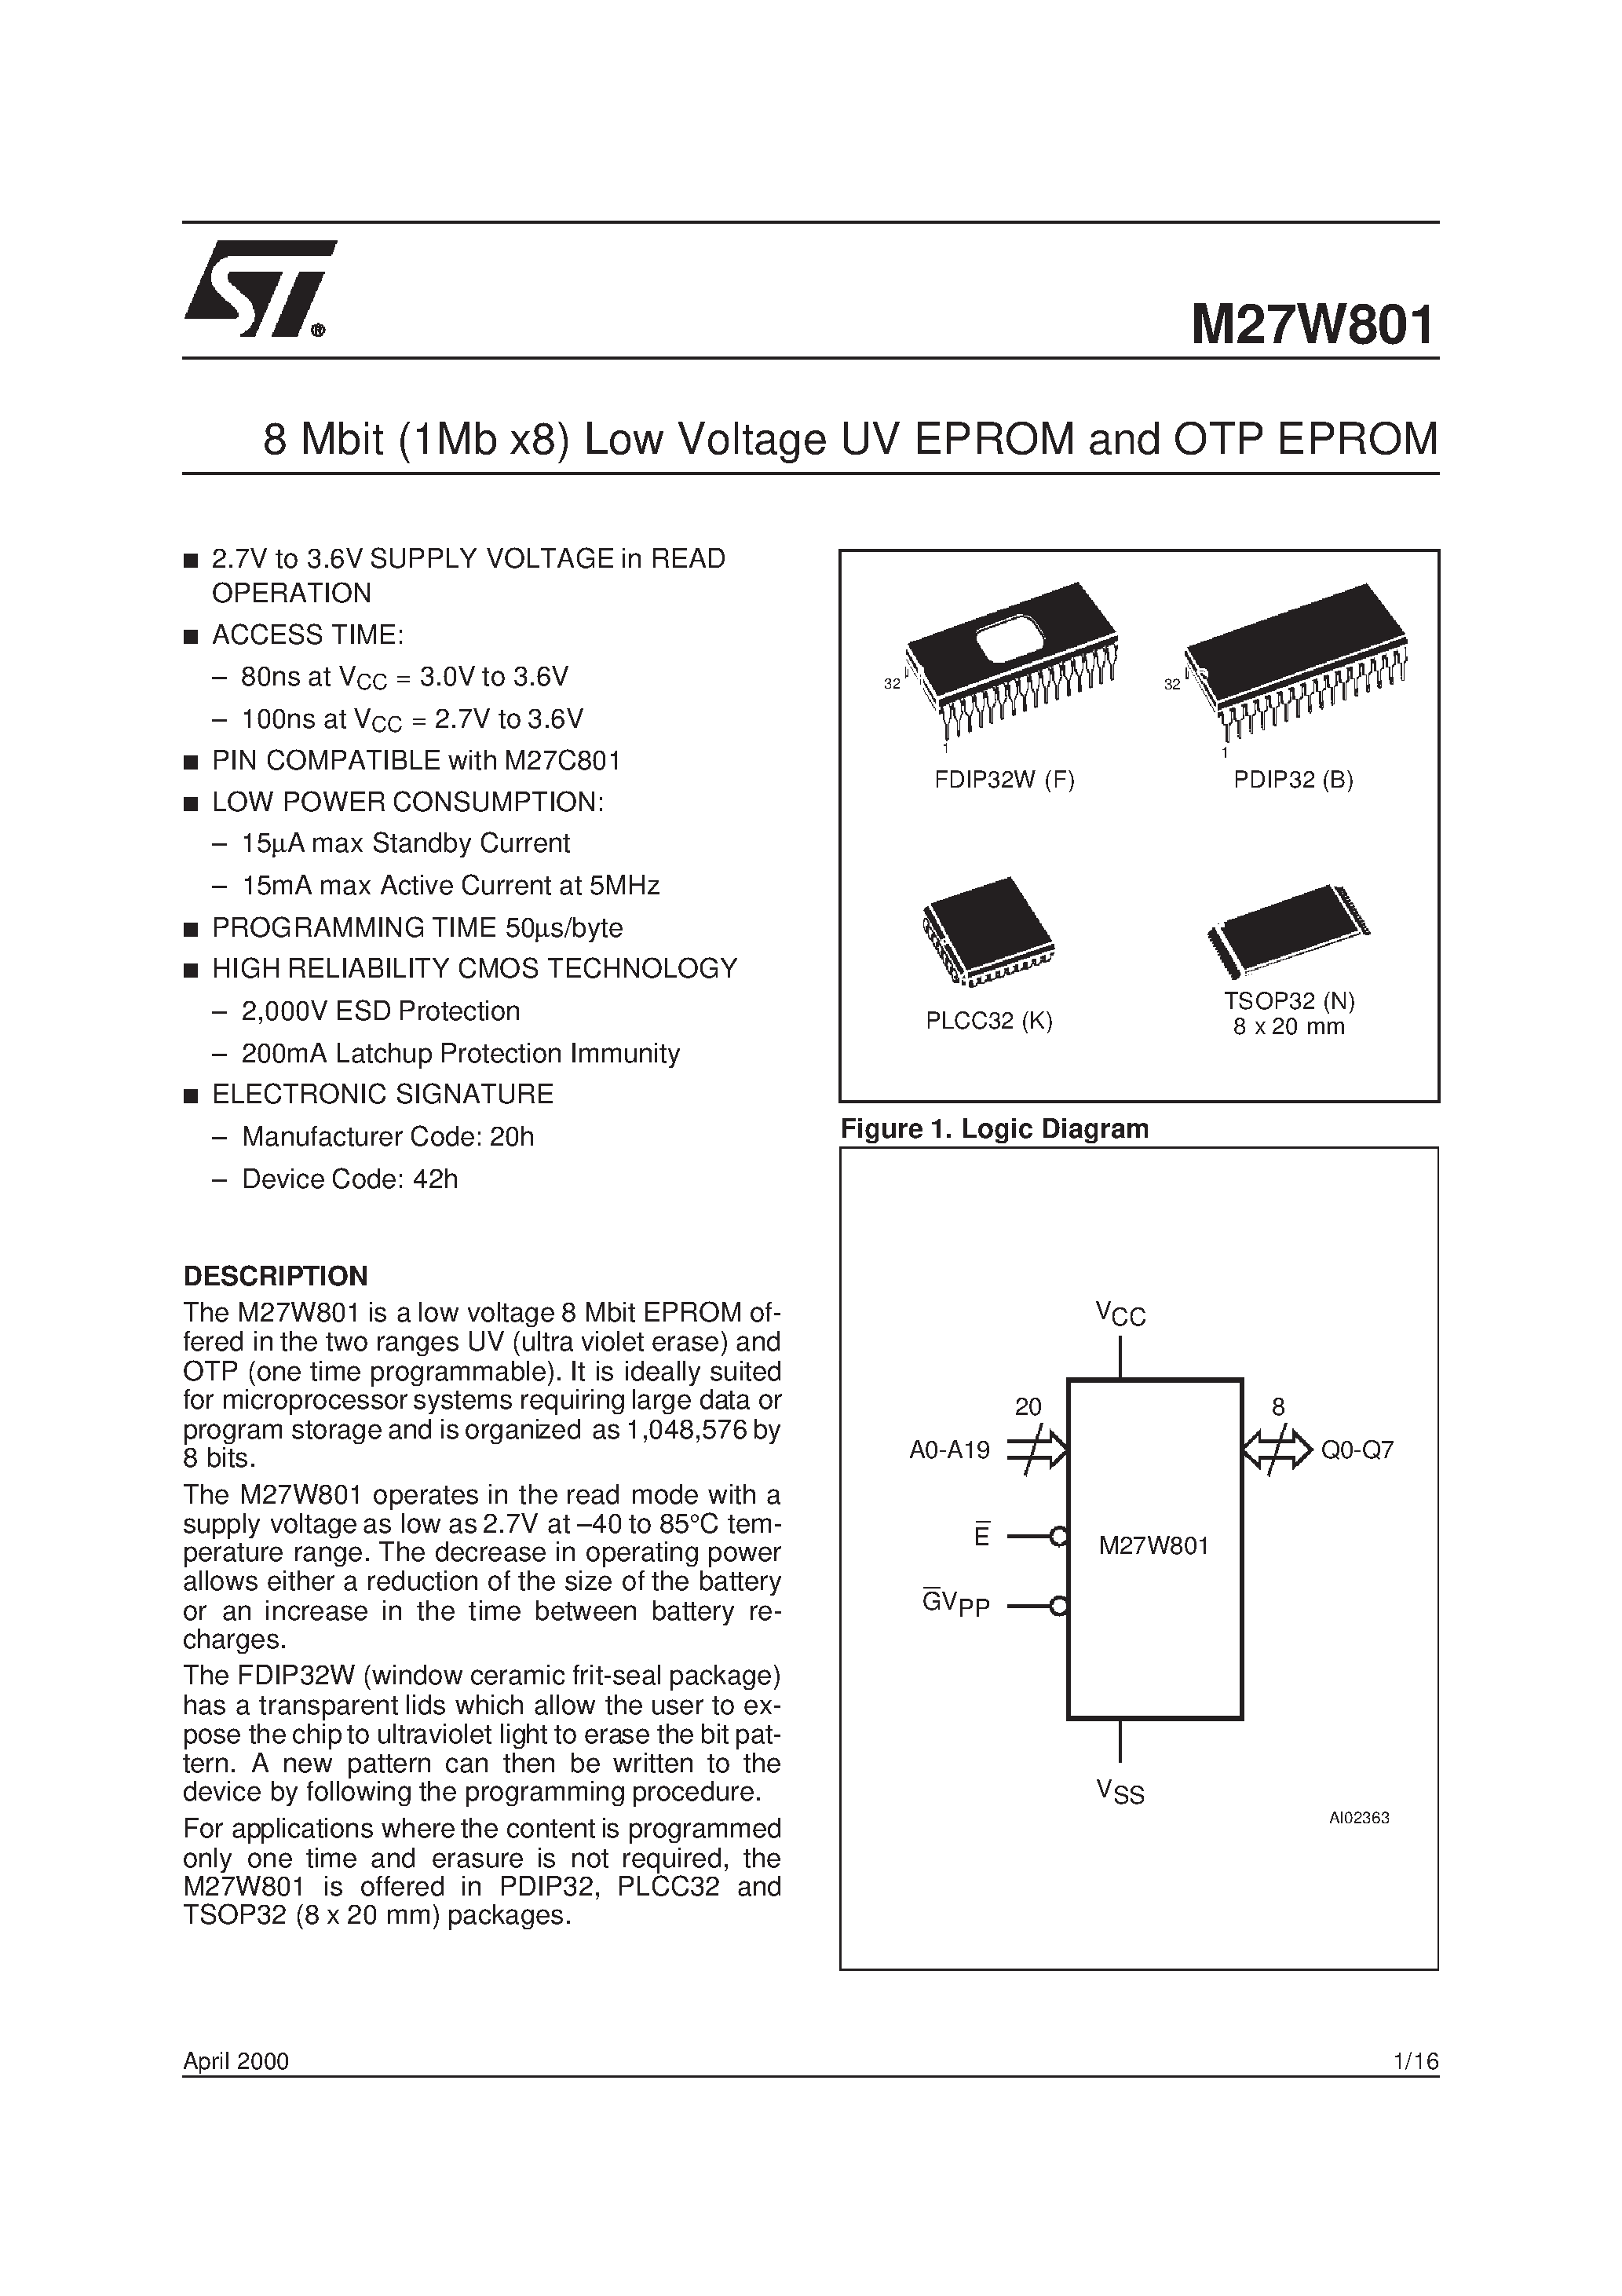 Datasheet M27W801-150K6TR - 8 Mbit 1Mb x8 Low Voltage UV EPROM and OTP EPROM page 1